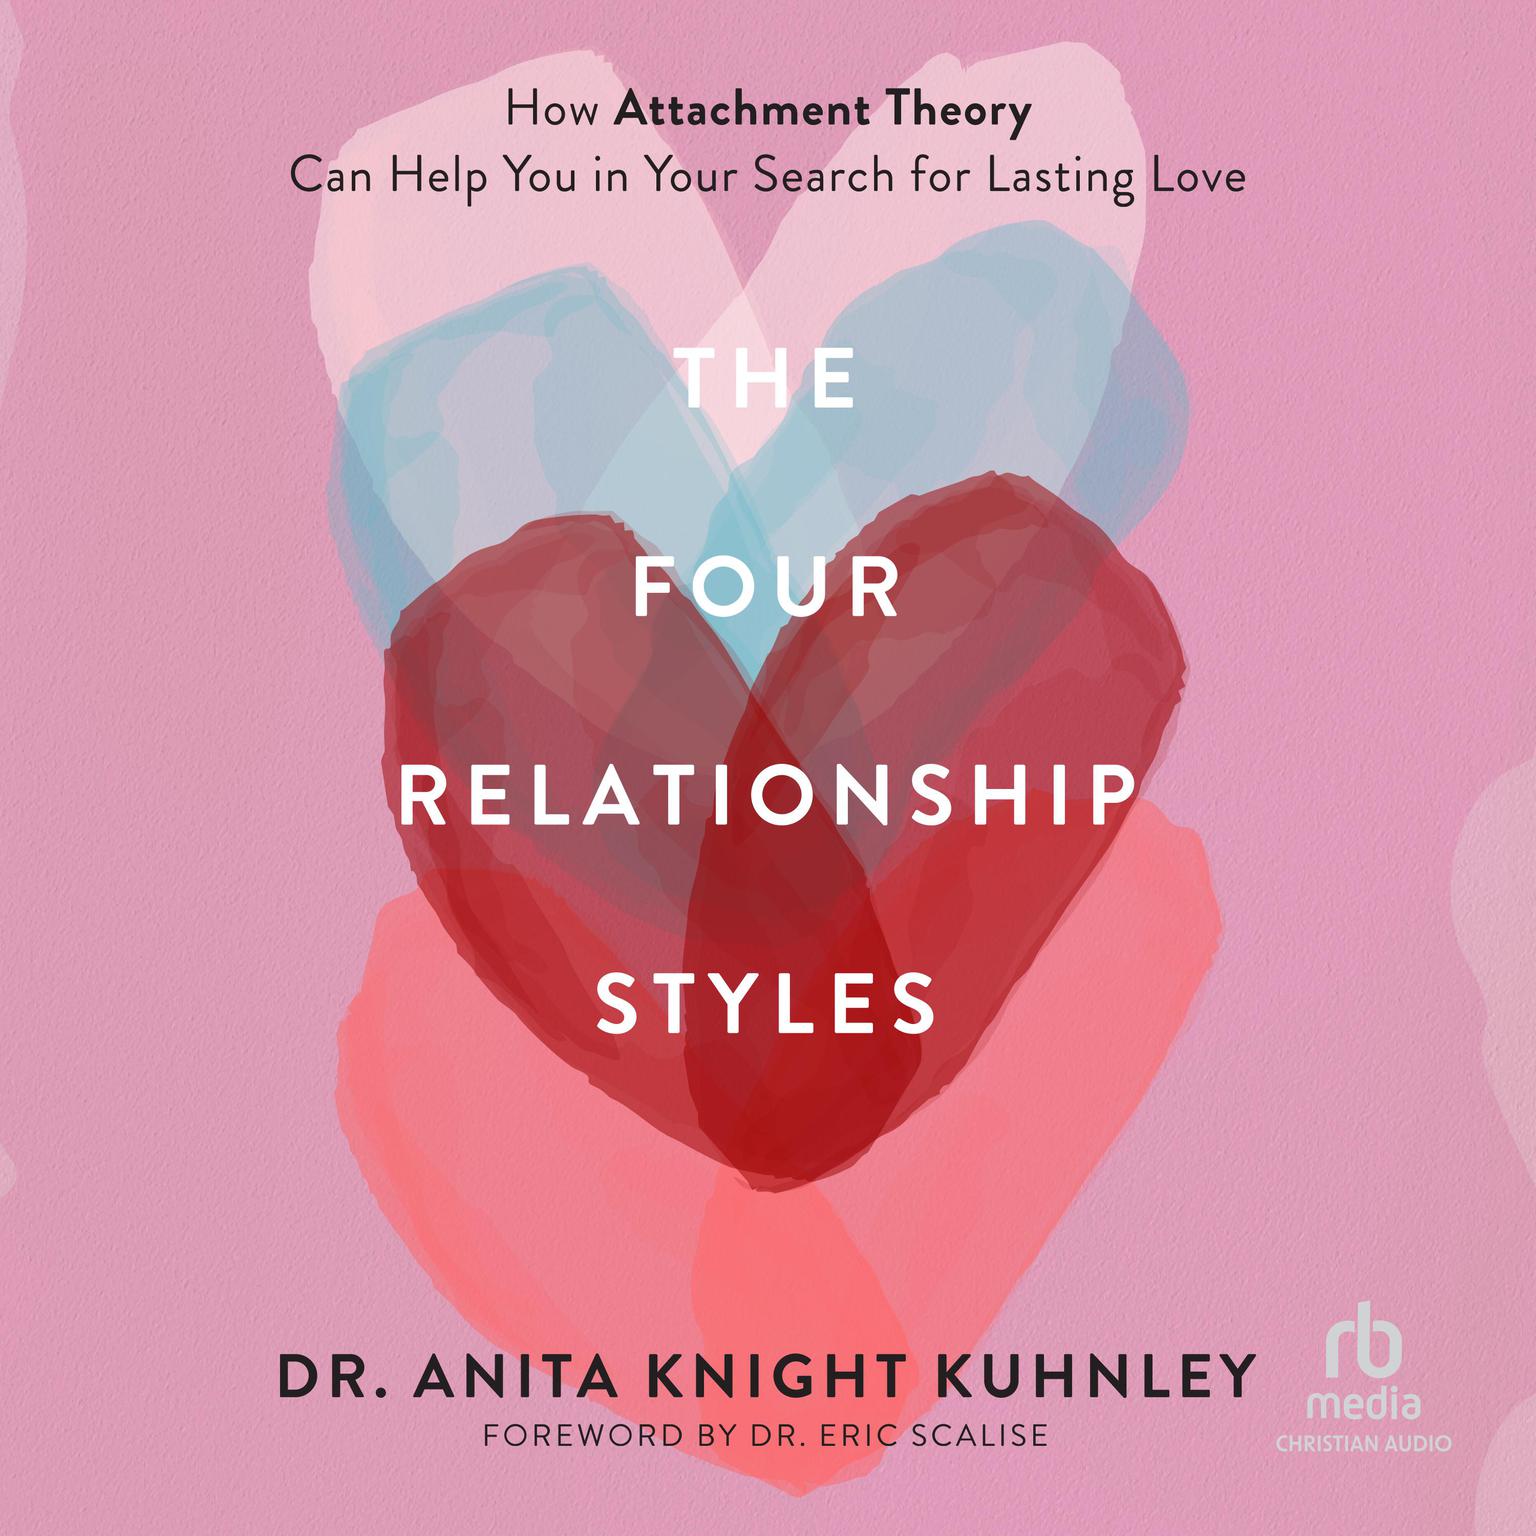 The Four Relationship Styles: How Attachment Theory Can Help You in Your Search for Lasting Love Audiobook, by Anita Knight Kuhnley